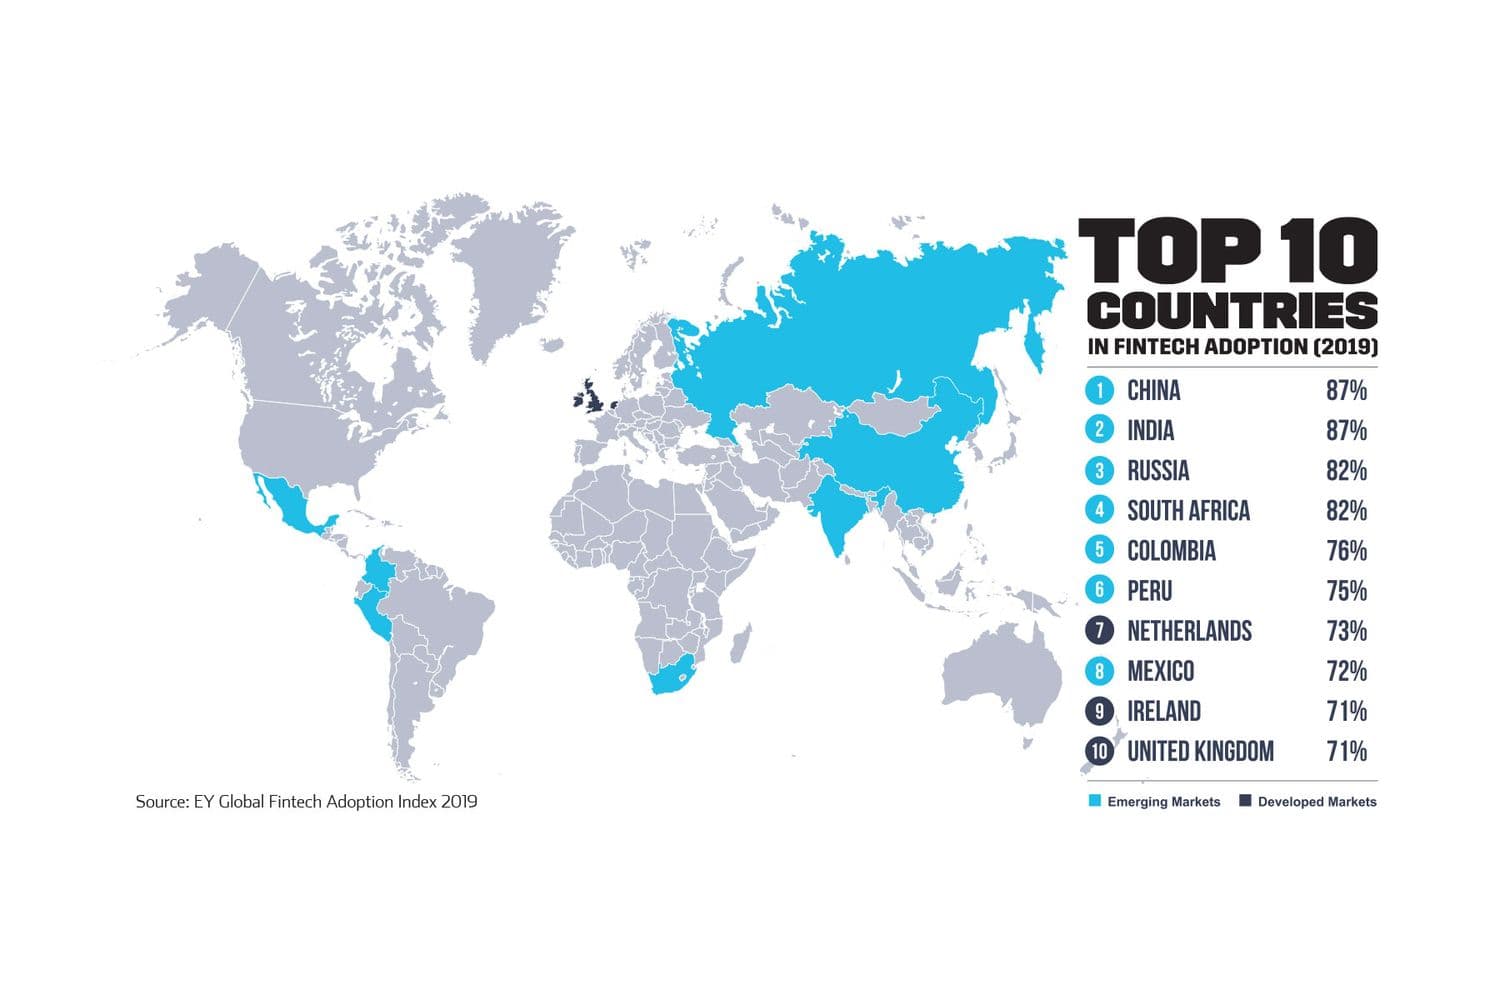 Top 10 countries in fintech adoption (2019)